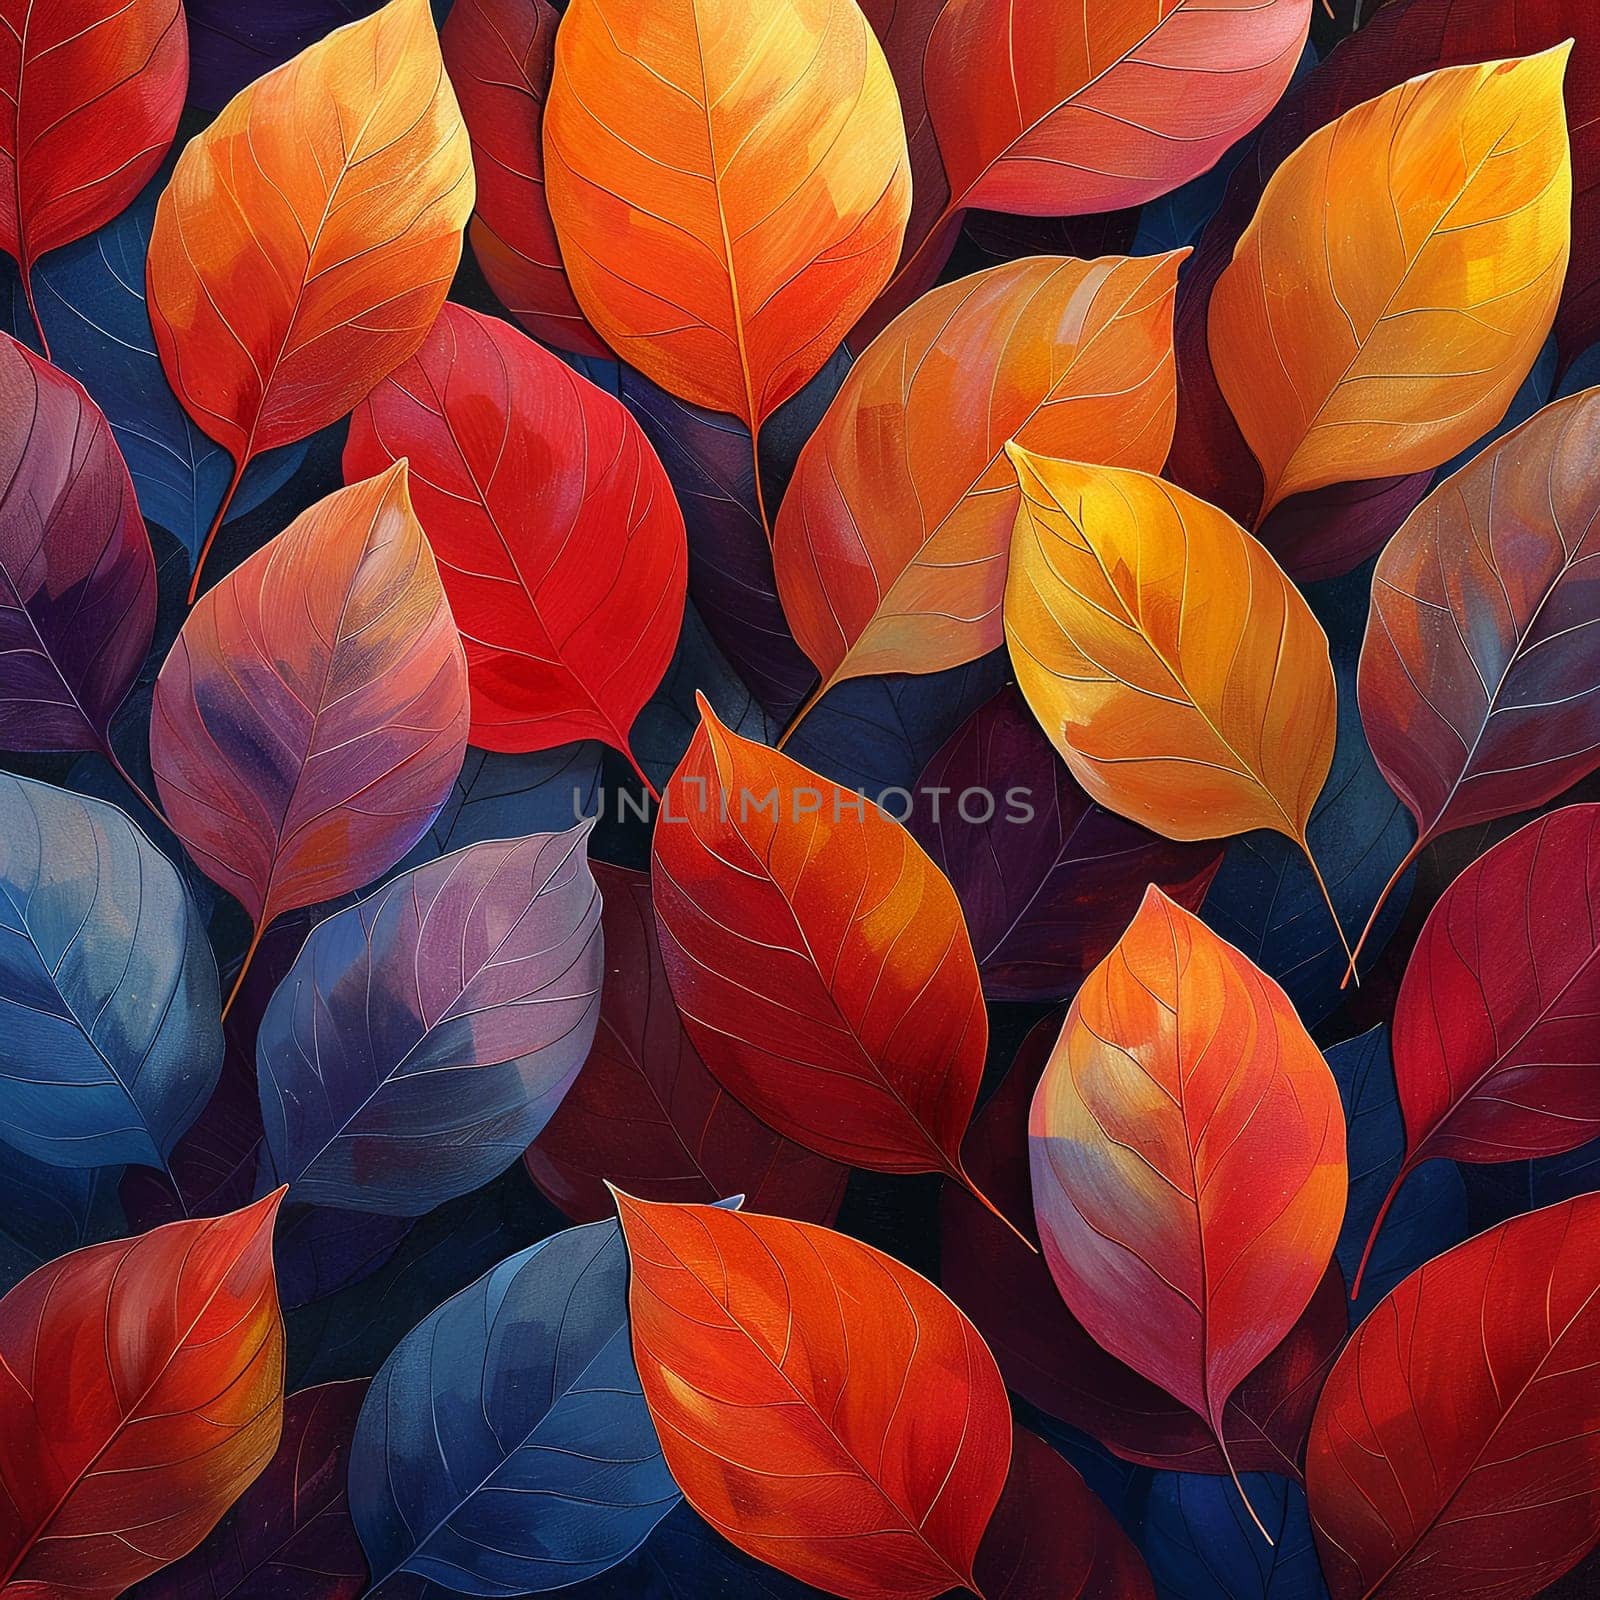 Vibrant autumn leaves background, representing change and beauty.